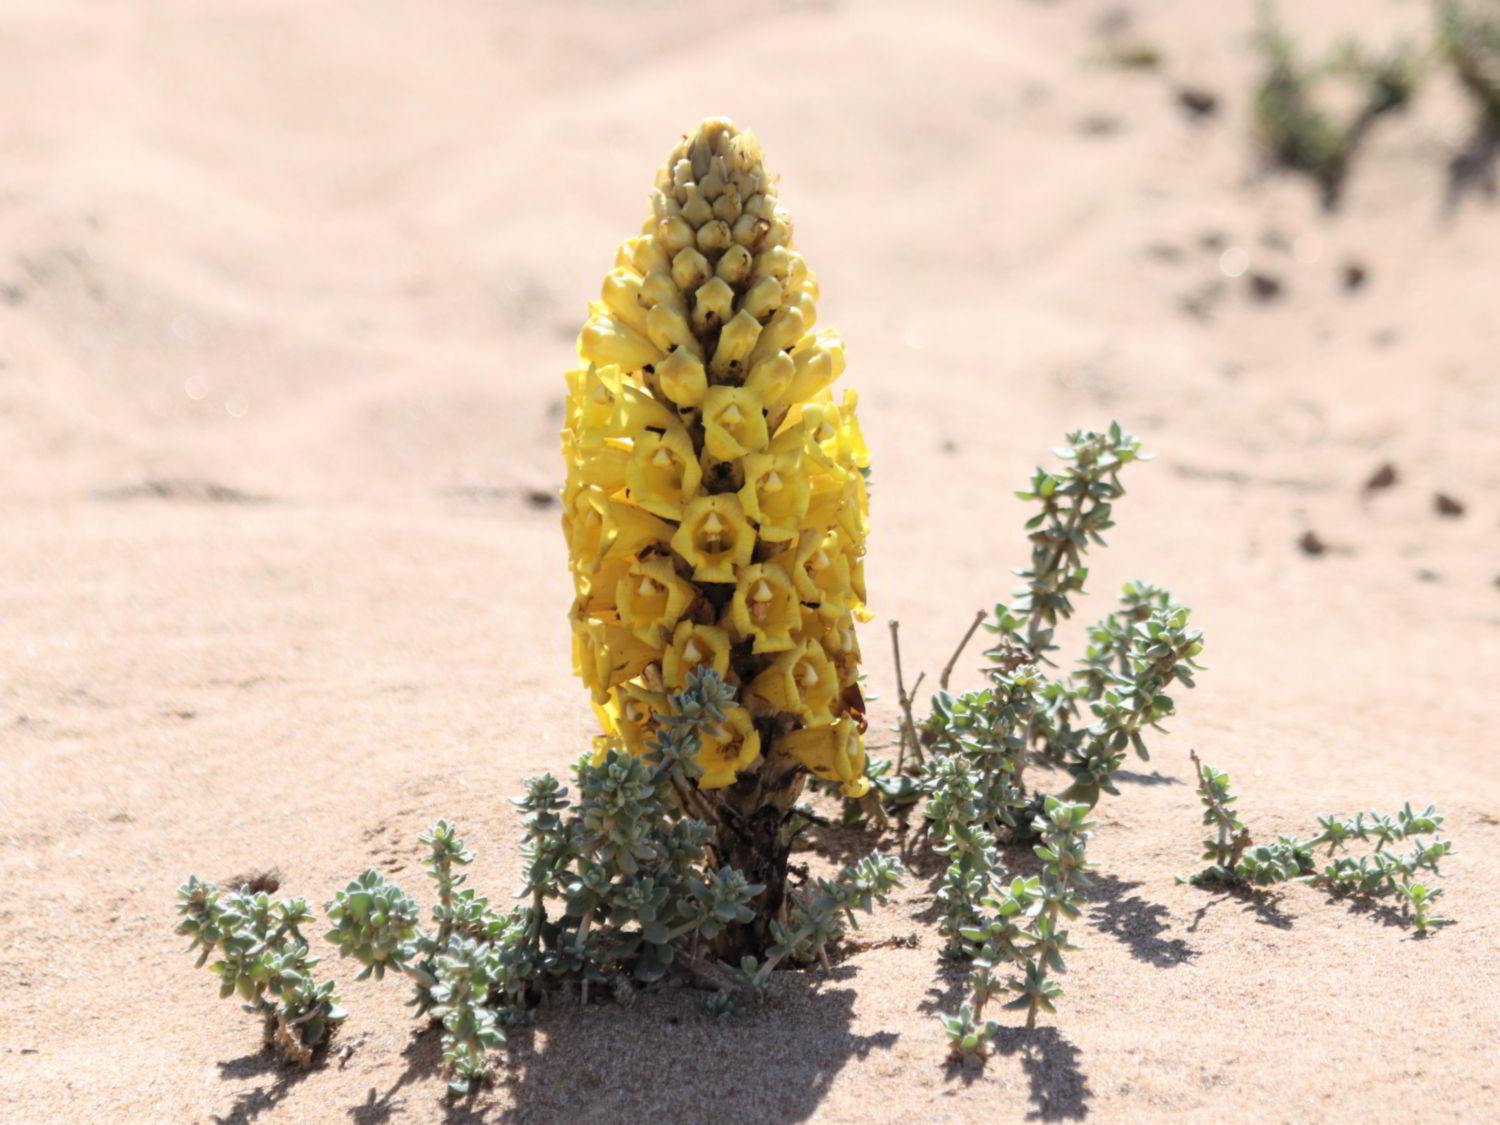 Yellow flower of Cistanche phelypaea emerging from sand